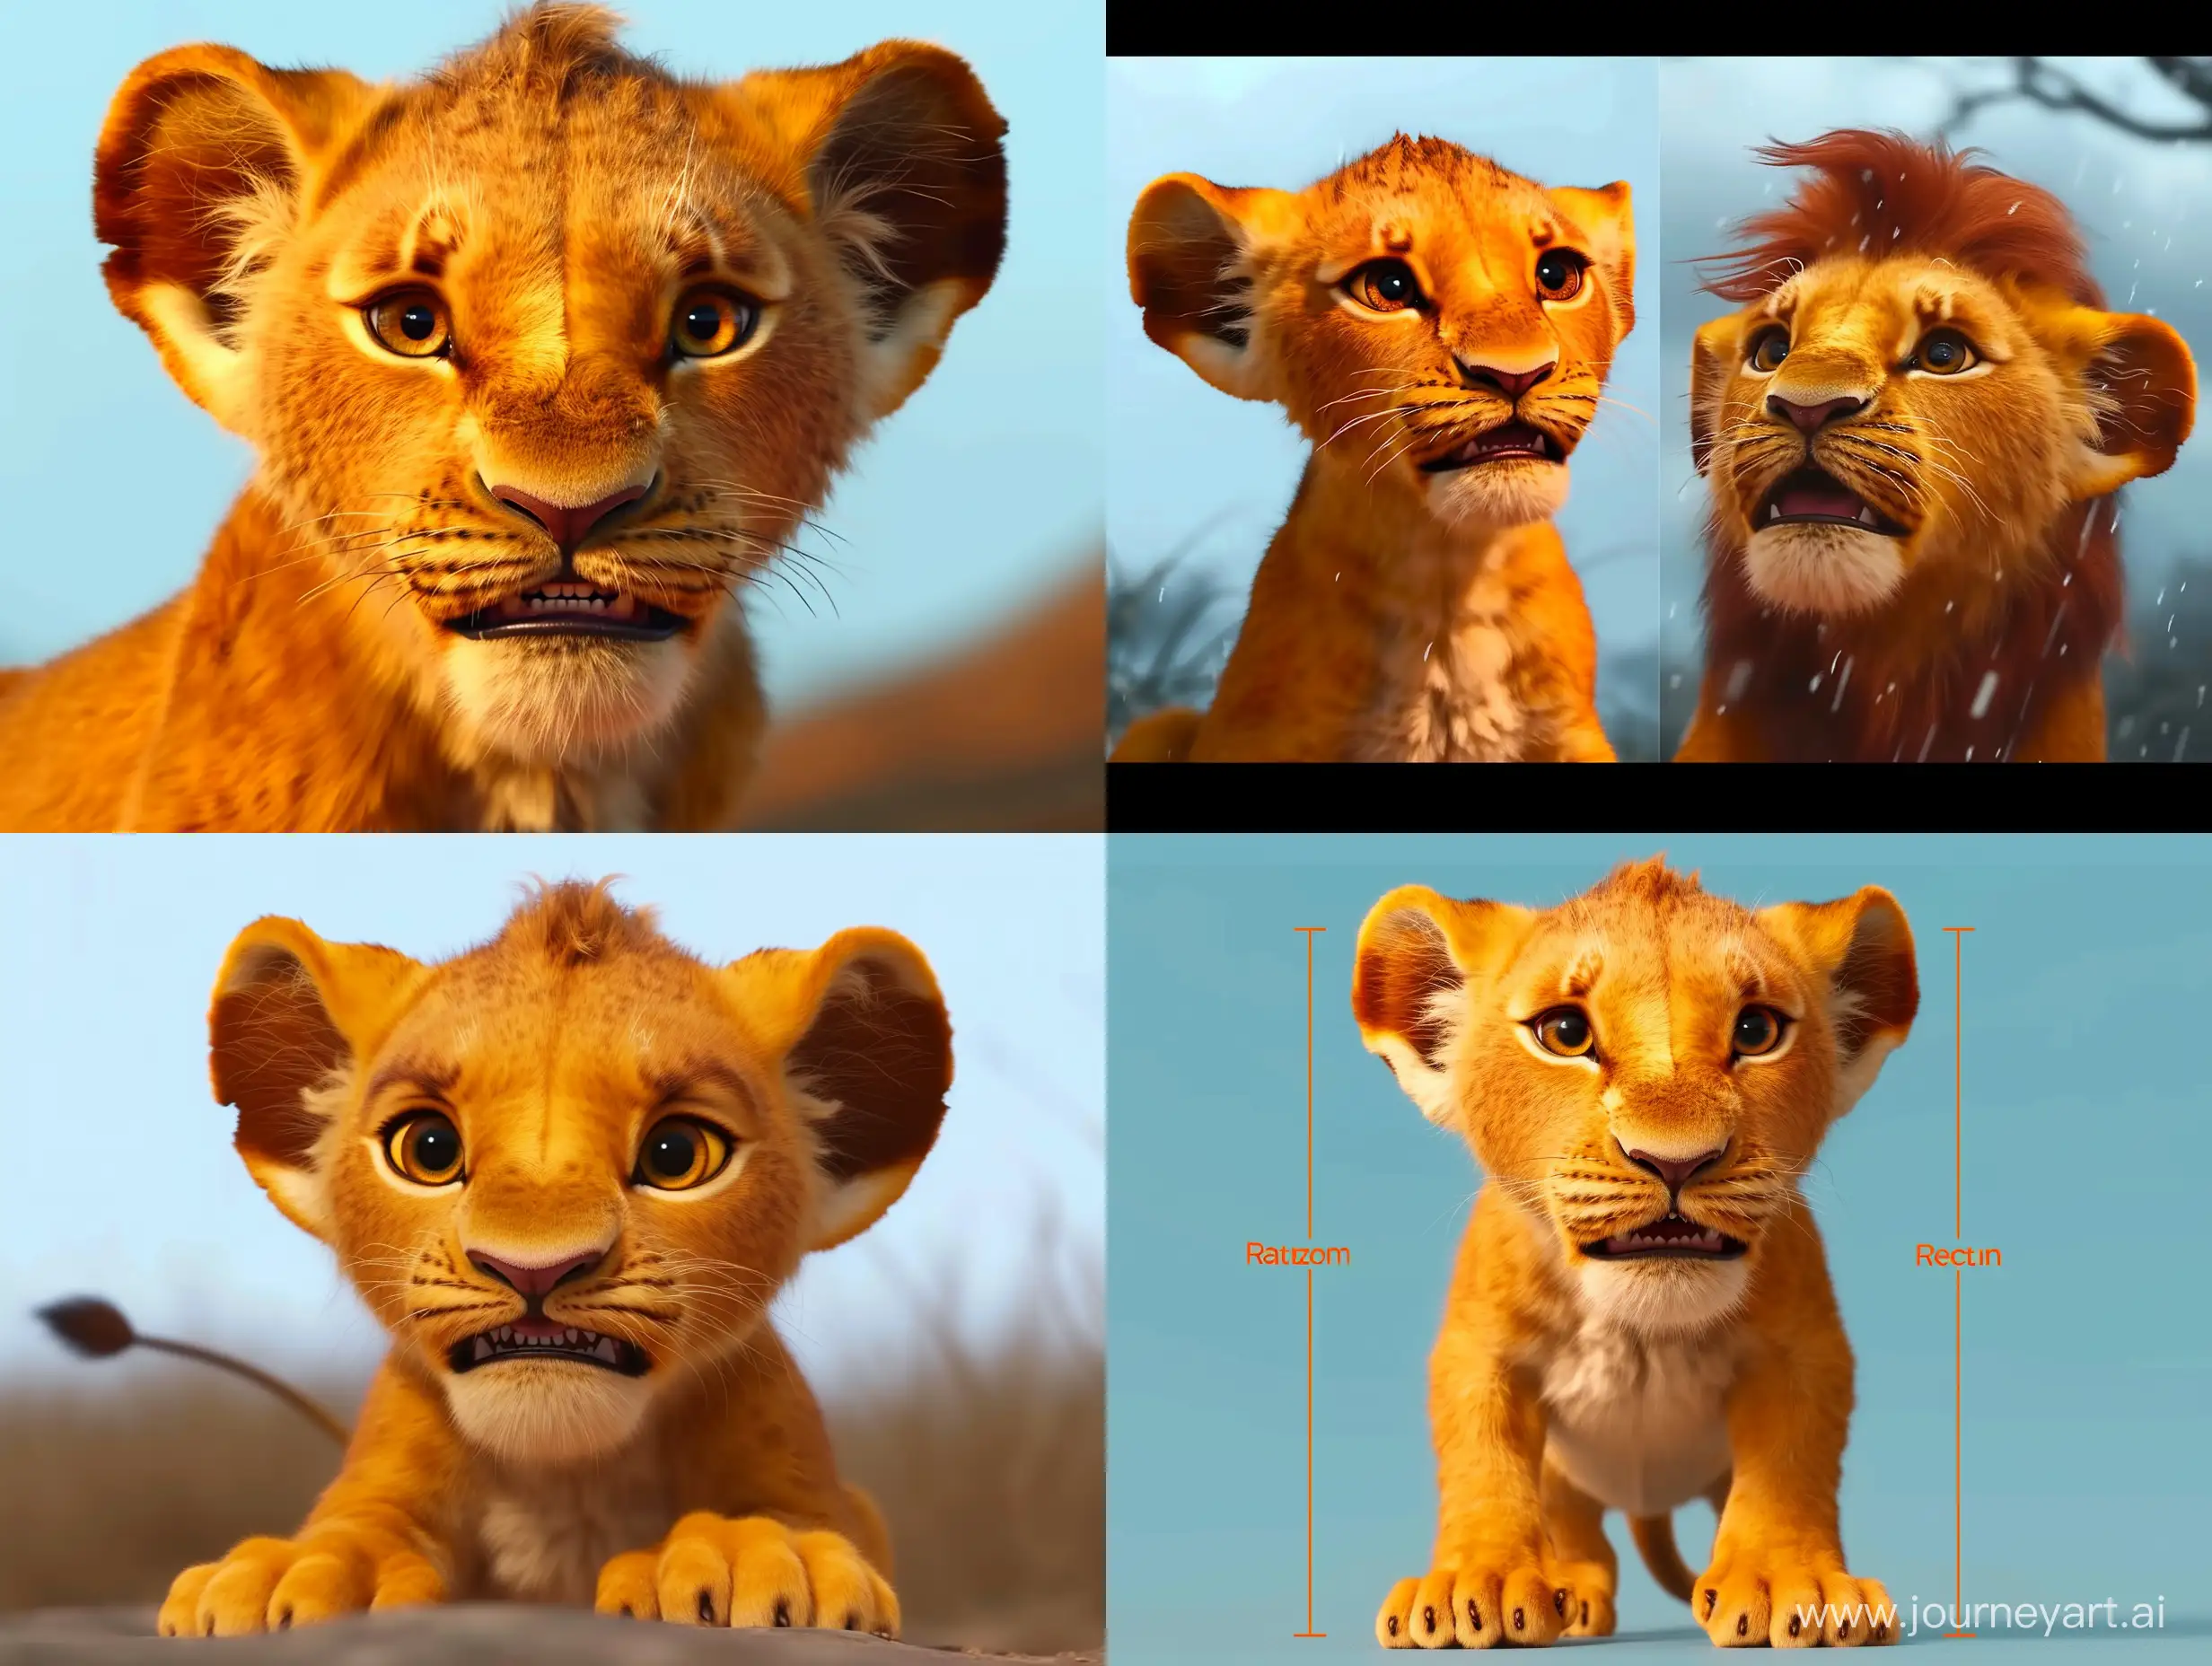 Realistic-Photo-of-Simba-from-The-Lion-King-in-a-Captivating-Scene